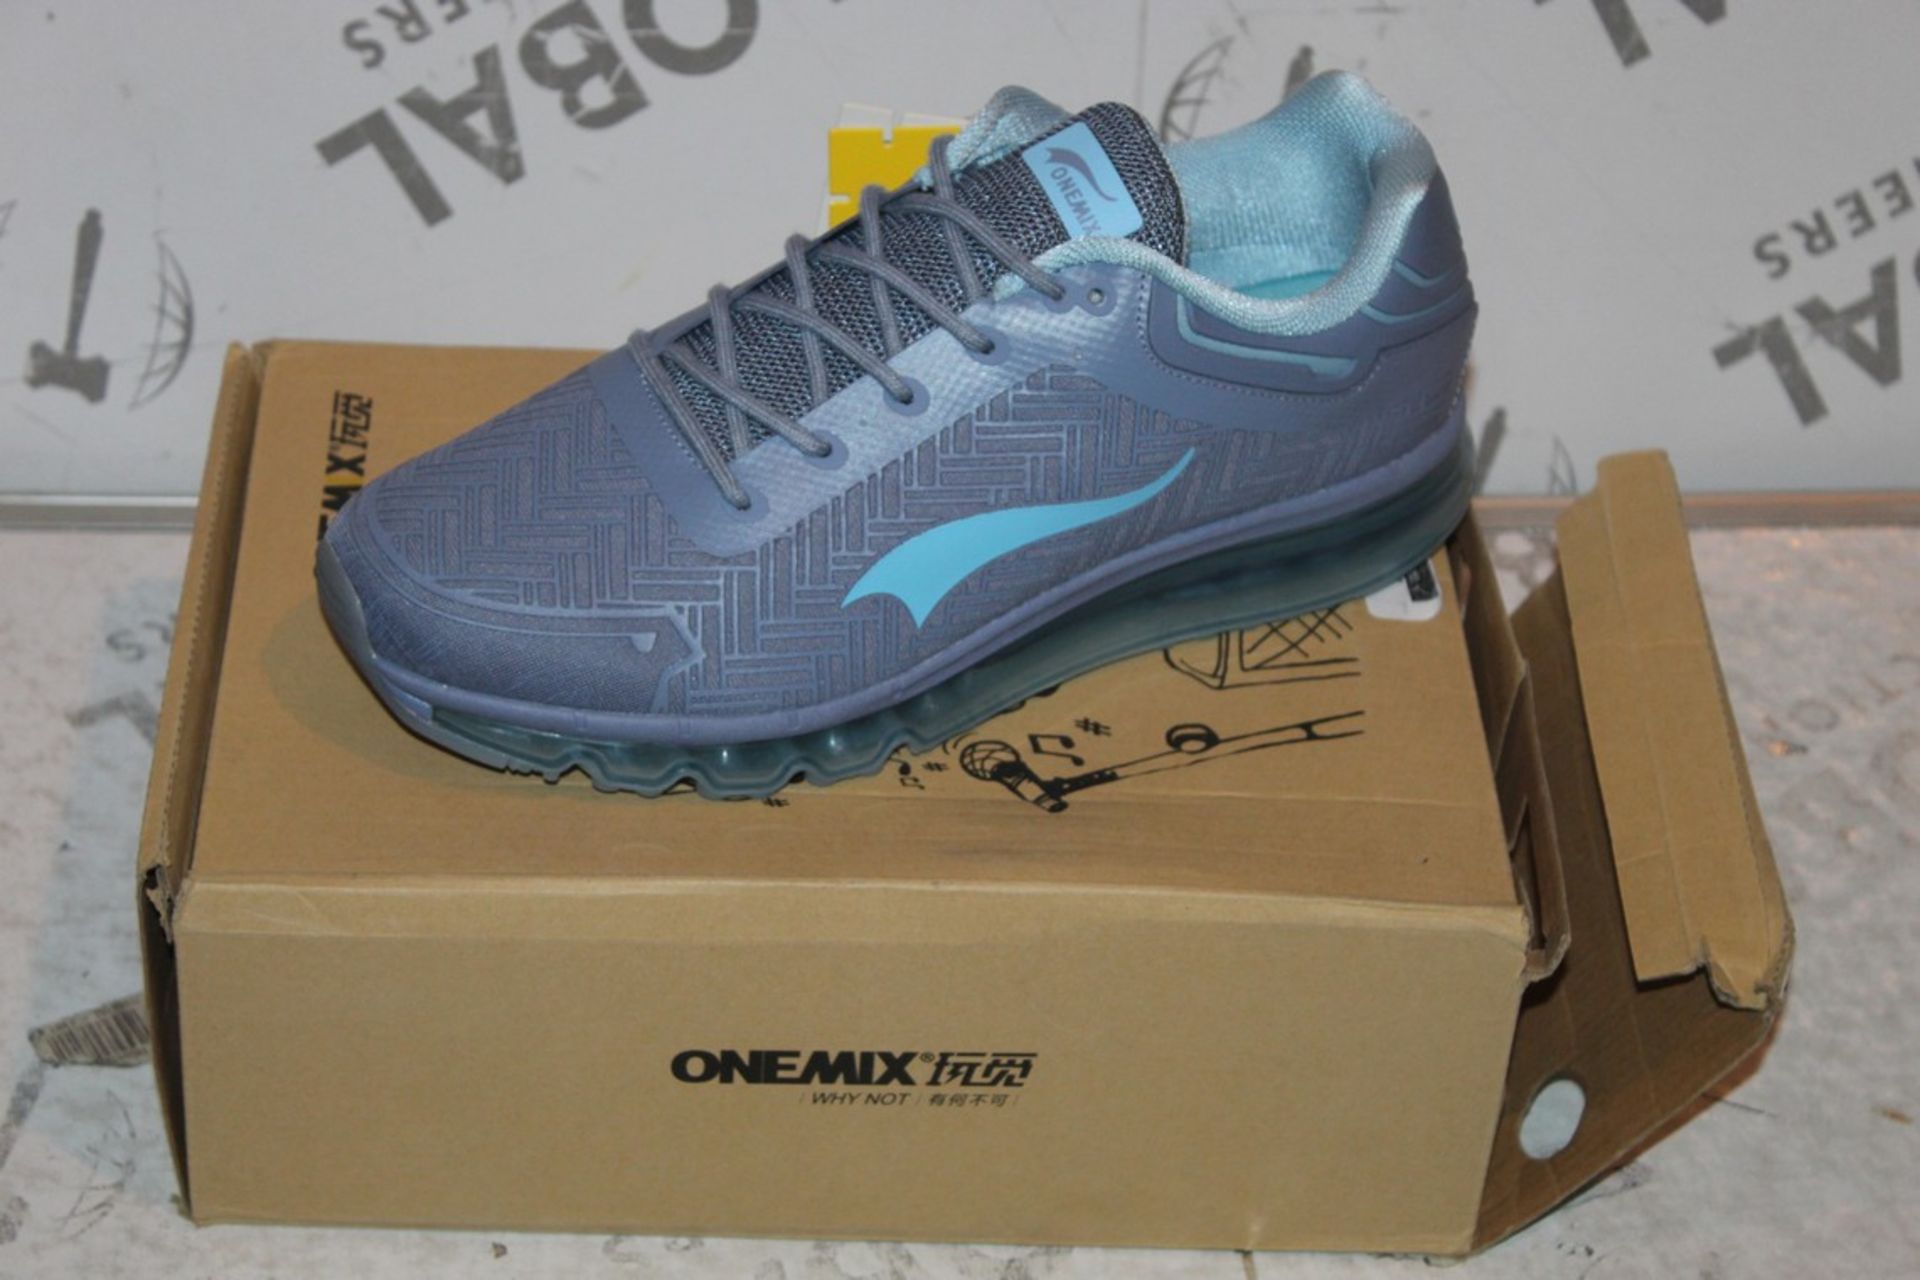 Boxed Brand New Pair of One Mix, Sizes UK 11, Lilac Mens, Running Trainers, RRP £45.00